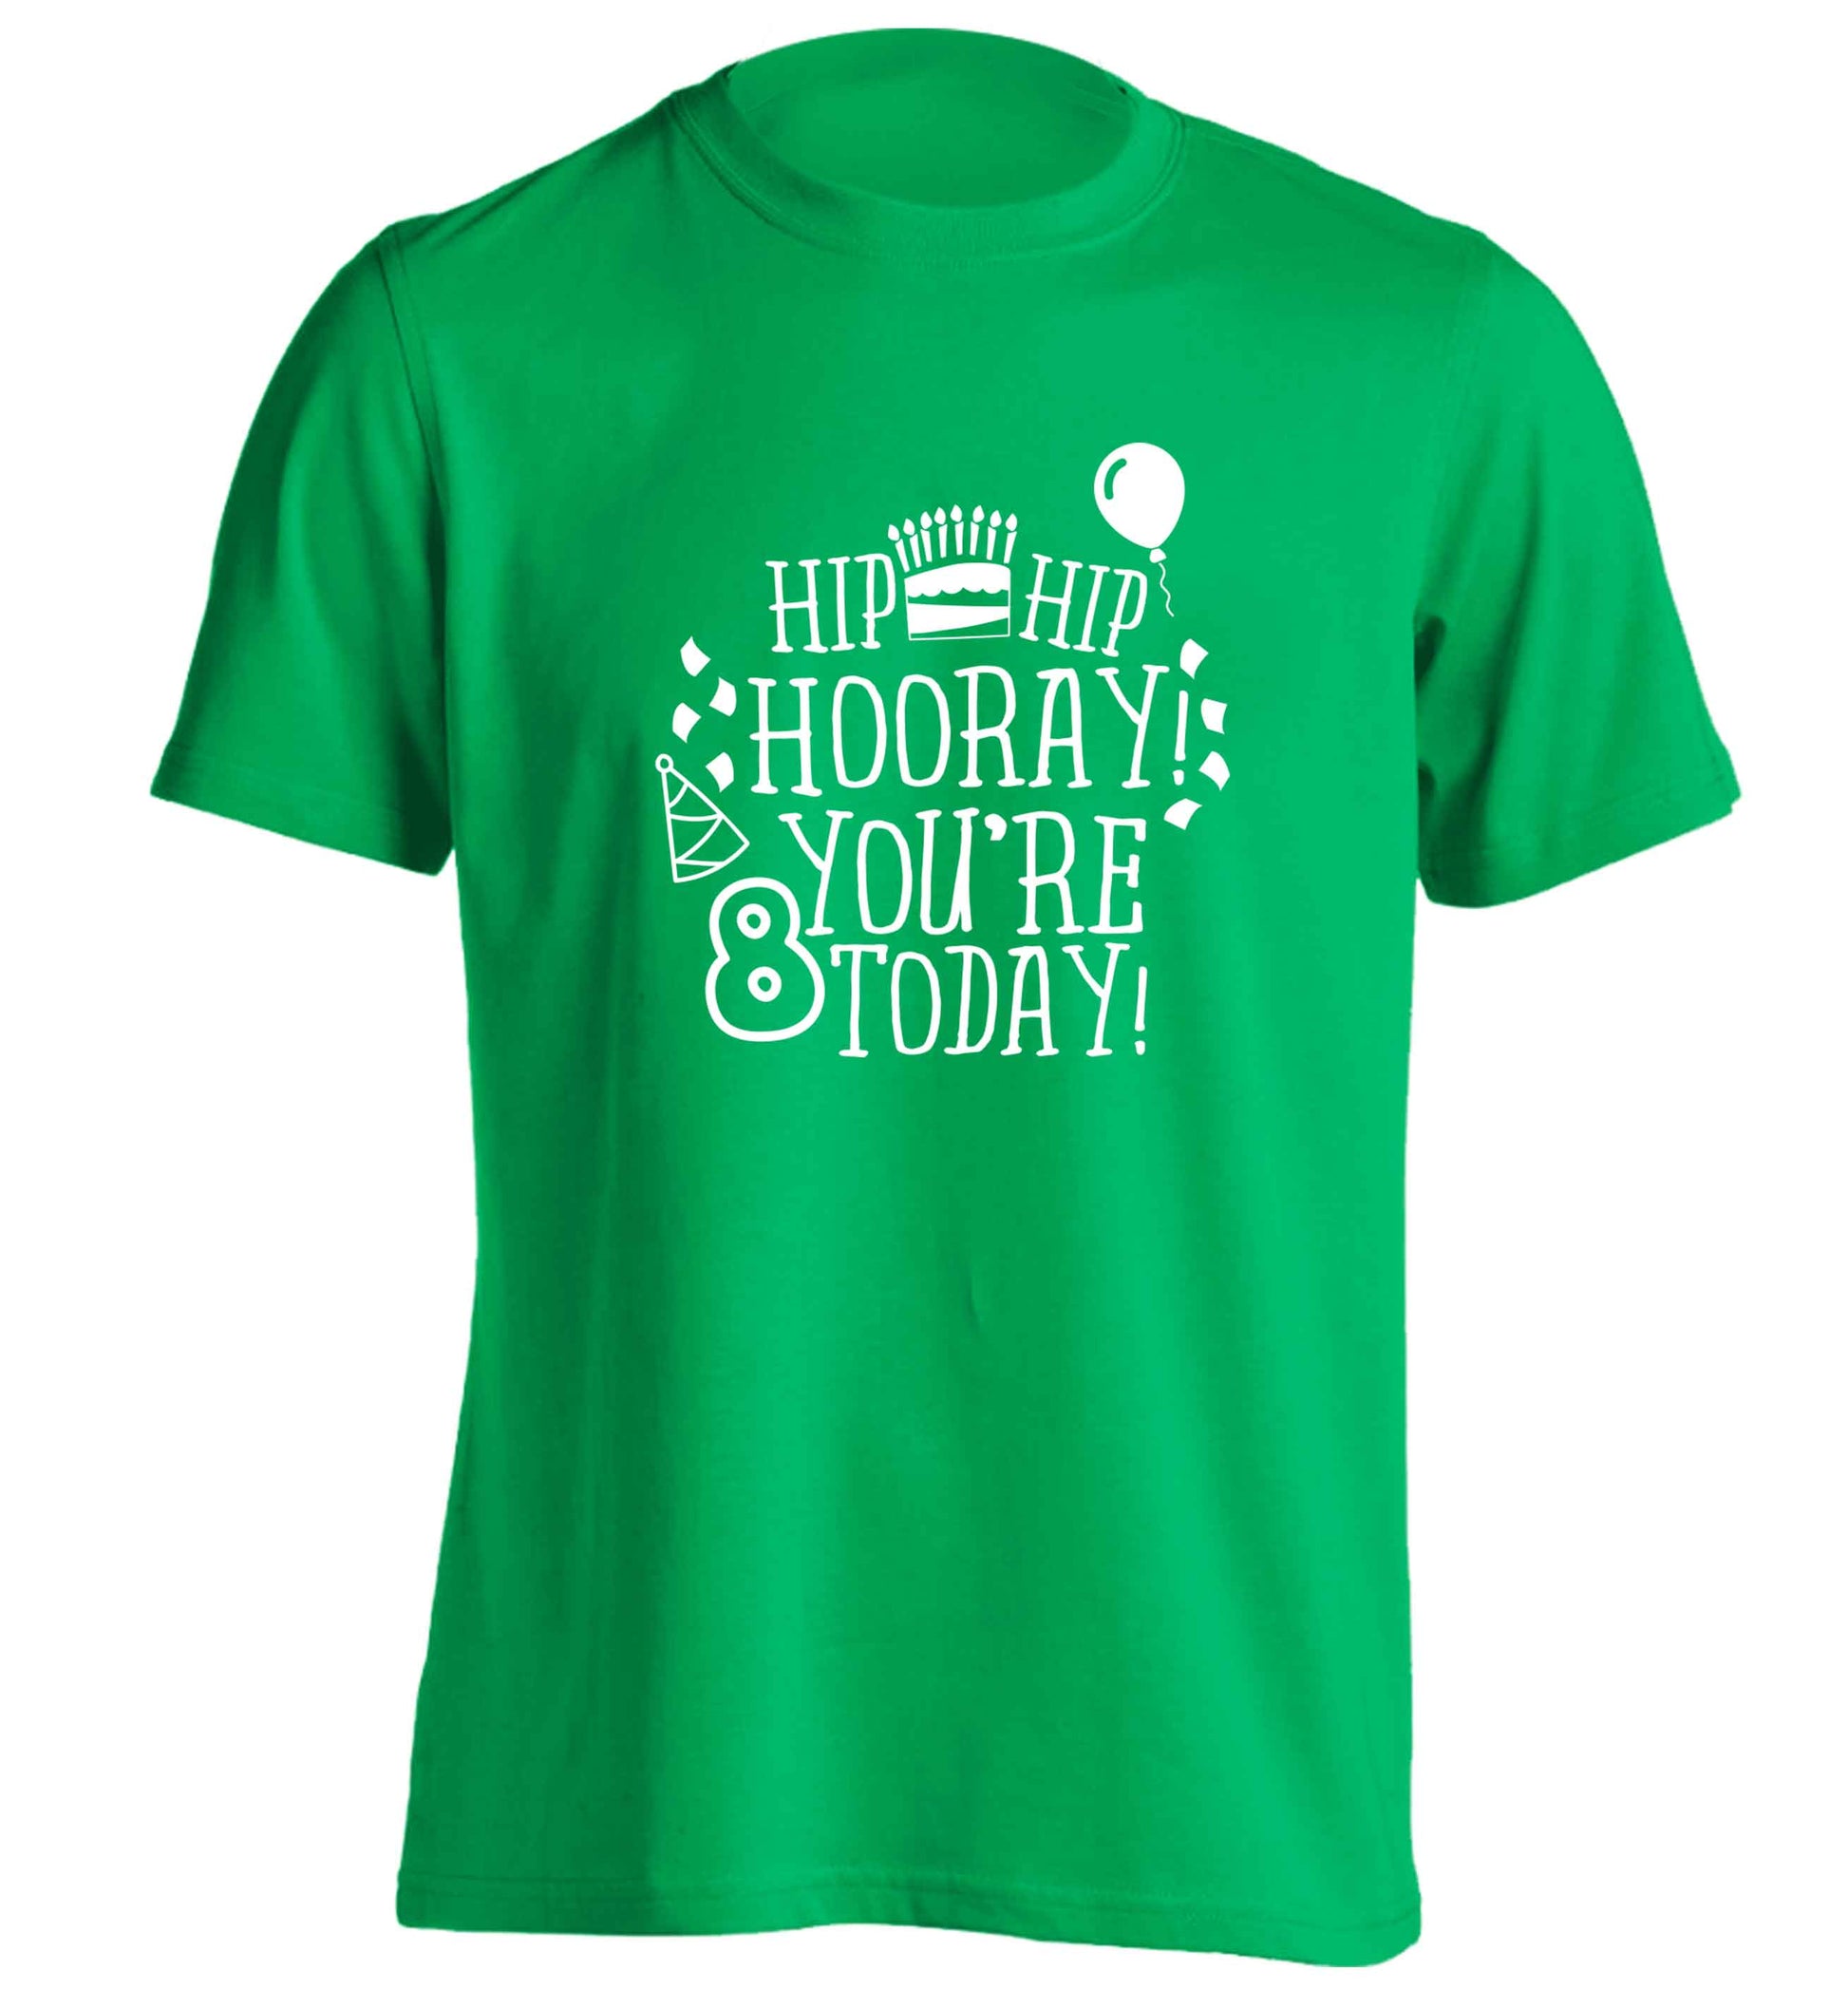 Hip hip hooray you're 8 today! adults unisex green Tshirt 2XL